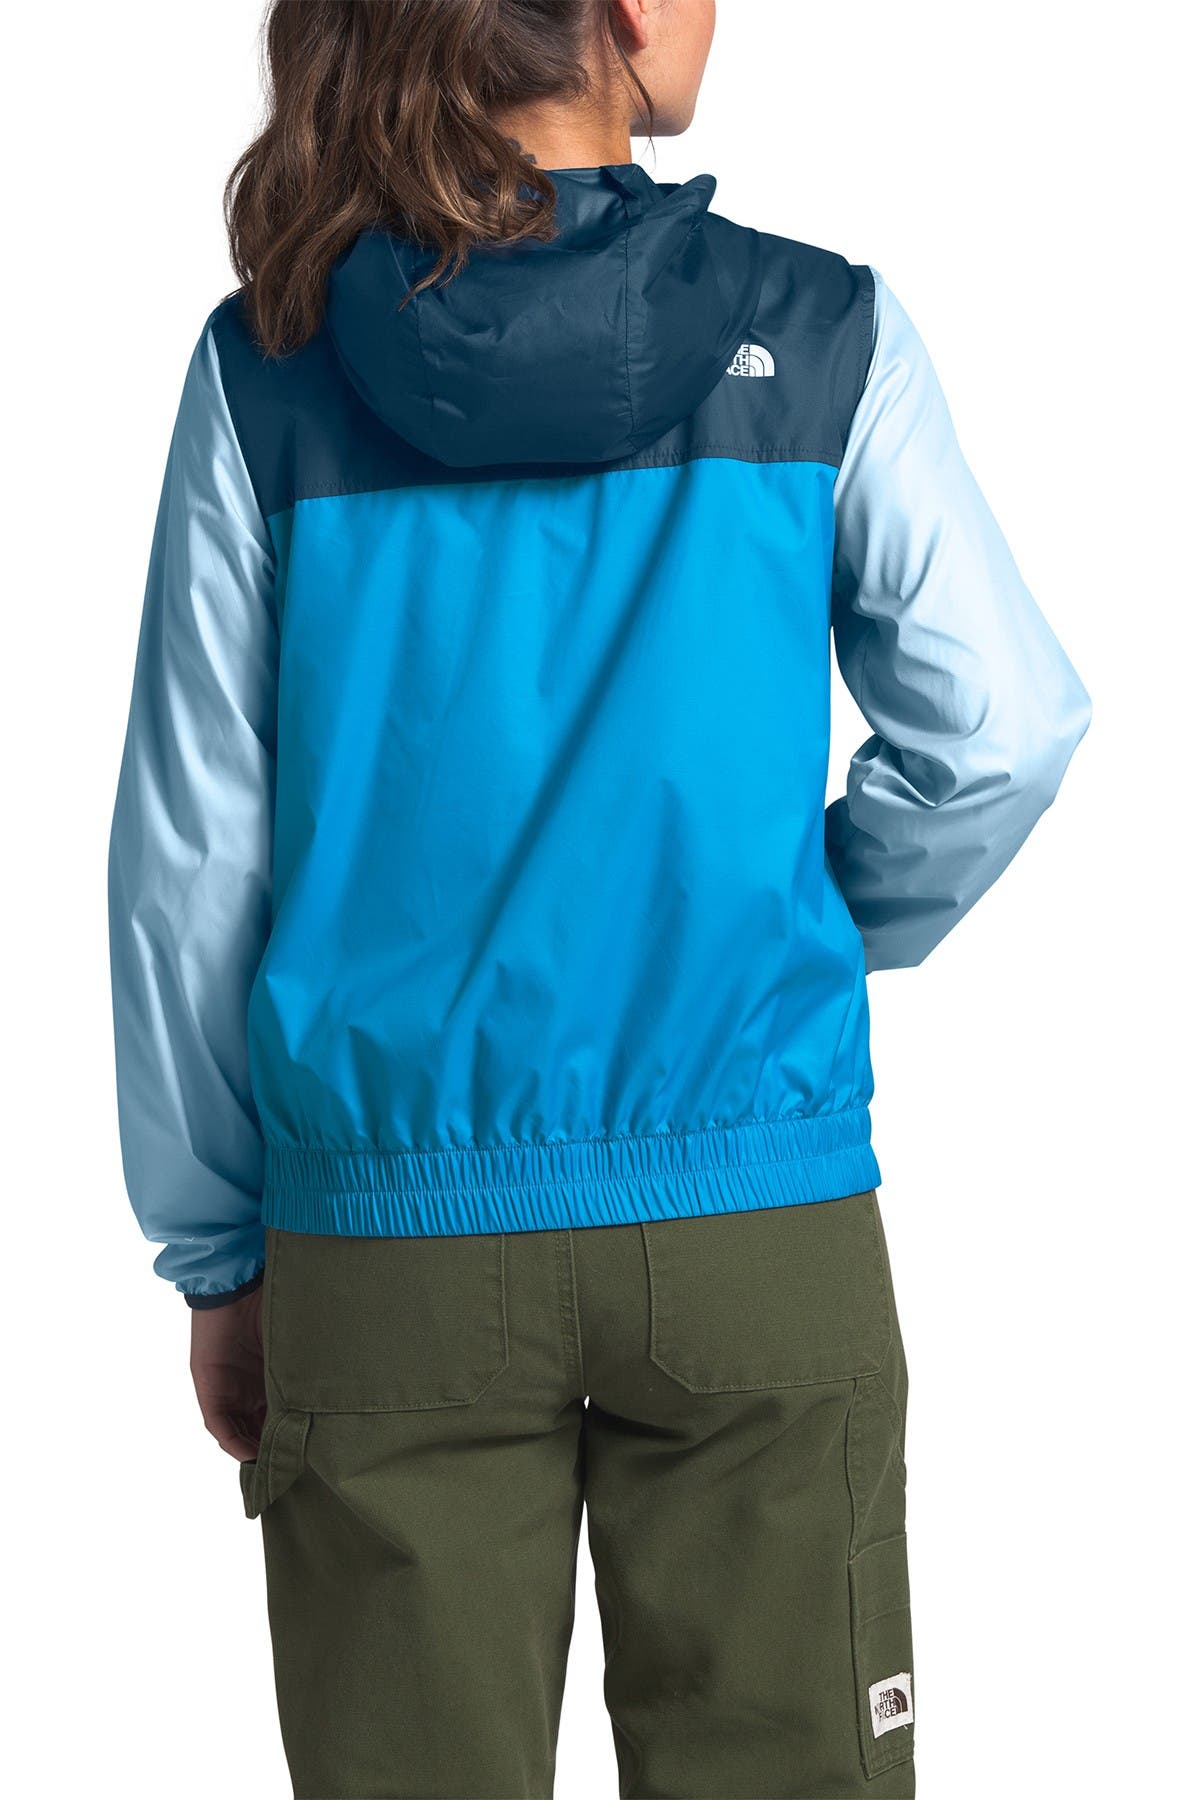 north face cyclone jacket review